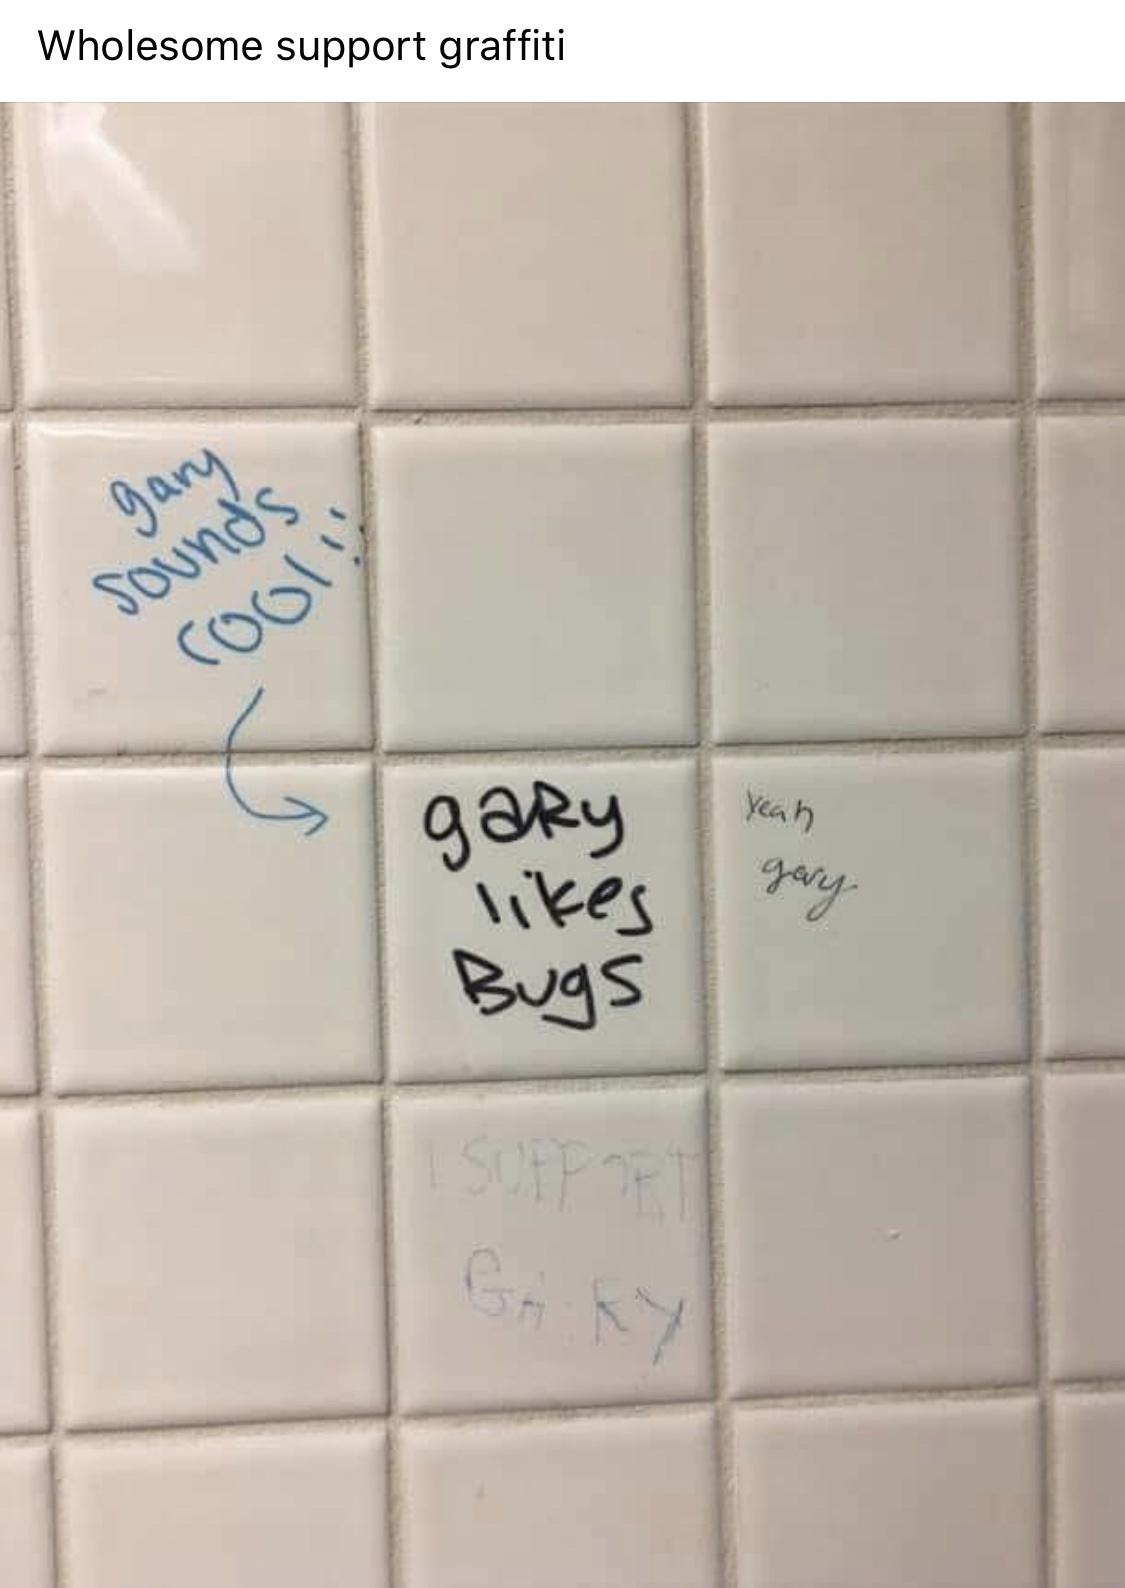 dank memes - tile - Wholesome support graffiti gary Sound's cool! Bugs Yeah gary